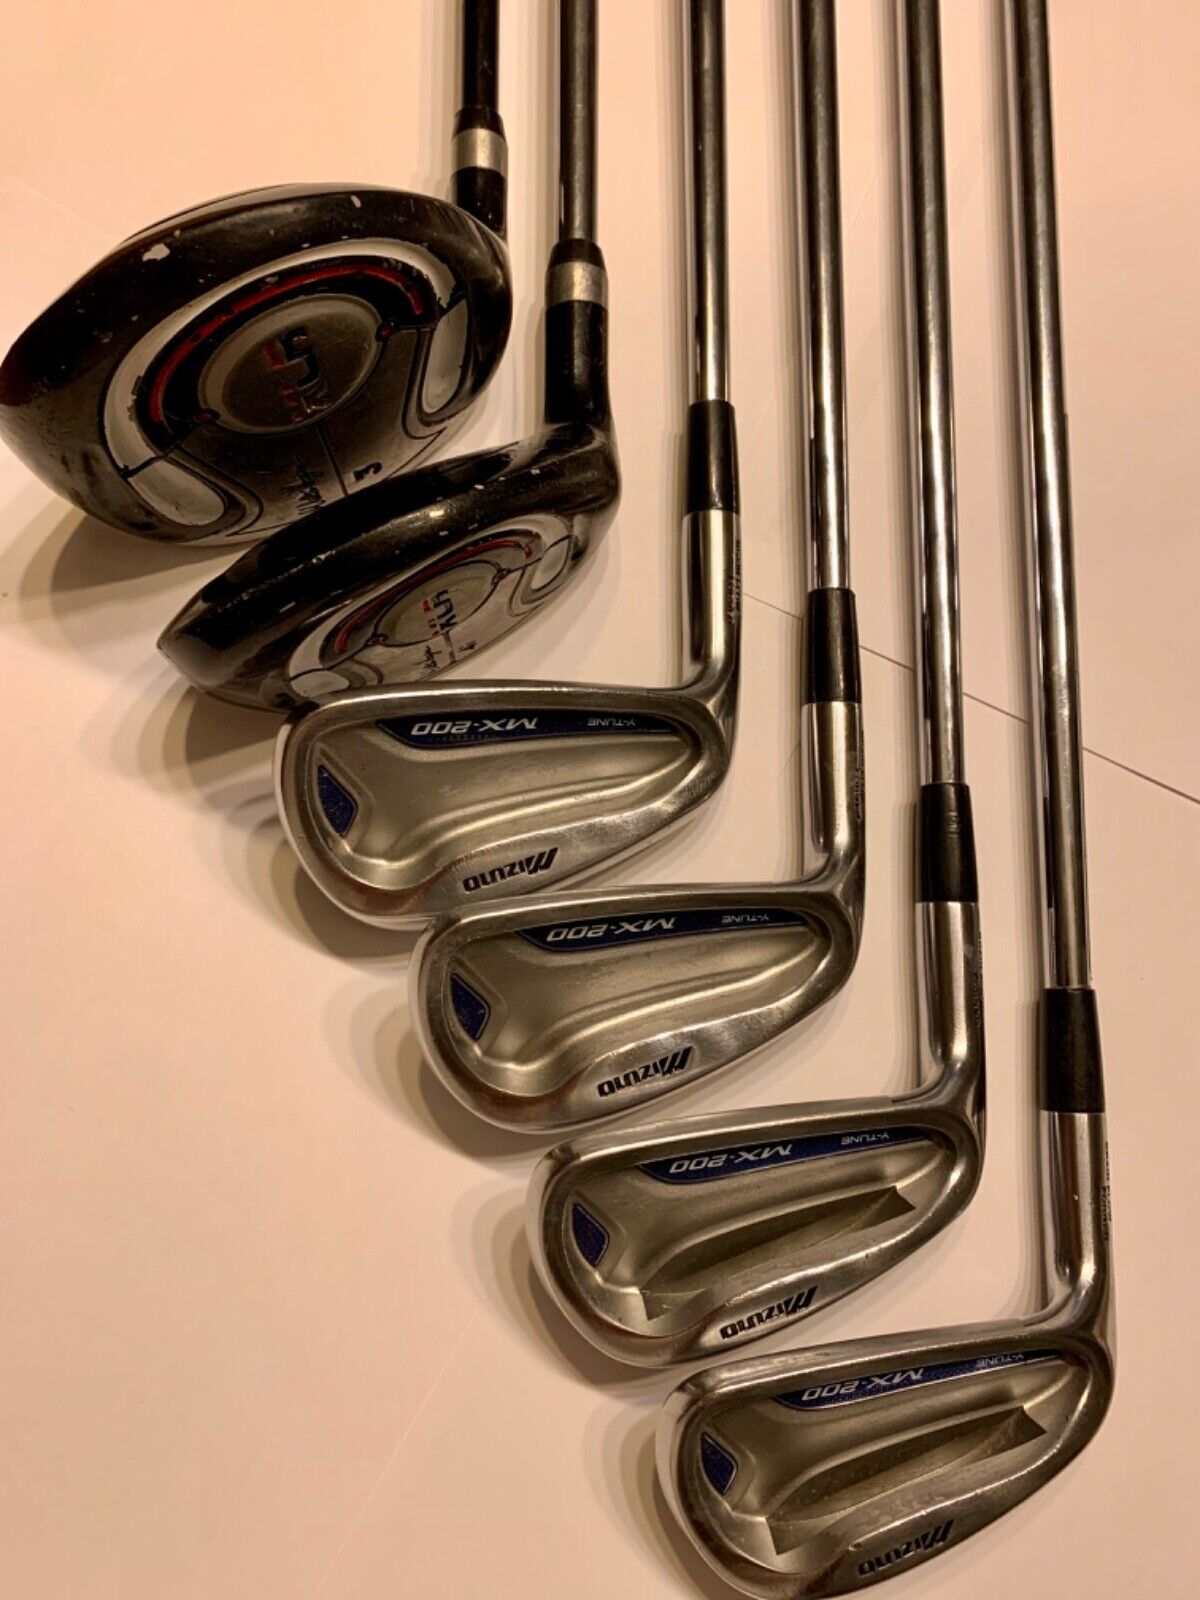 used clubs online